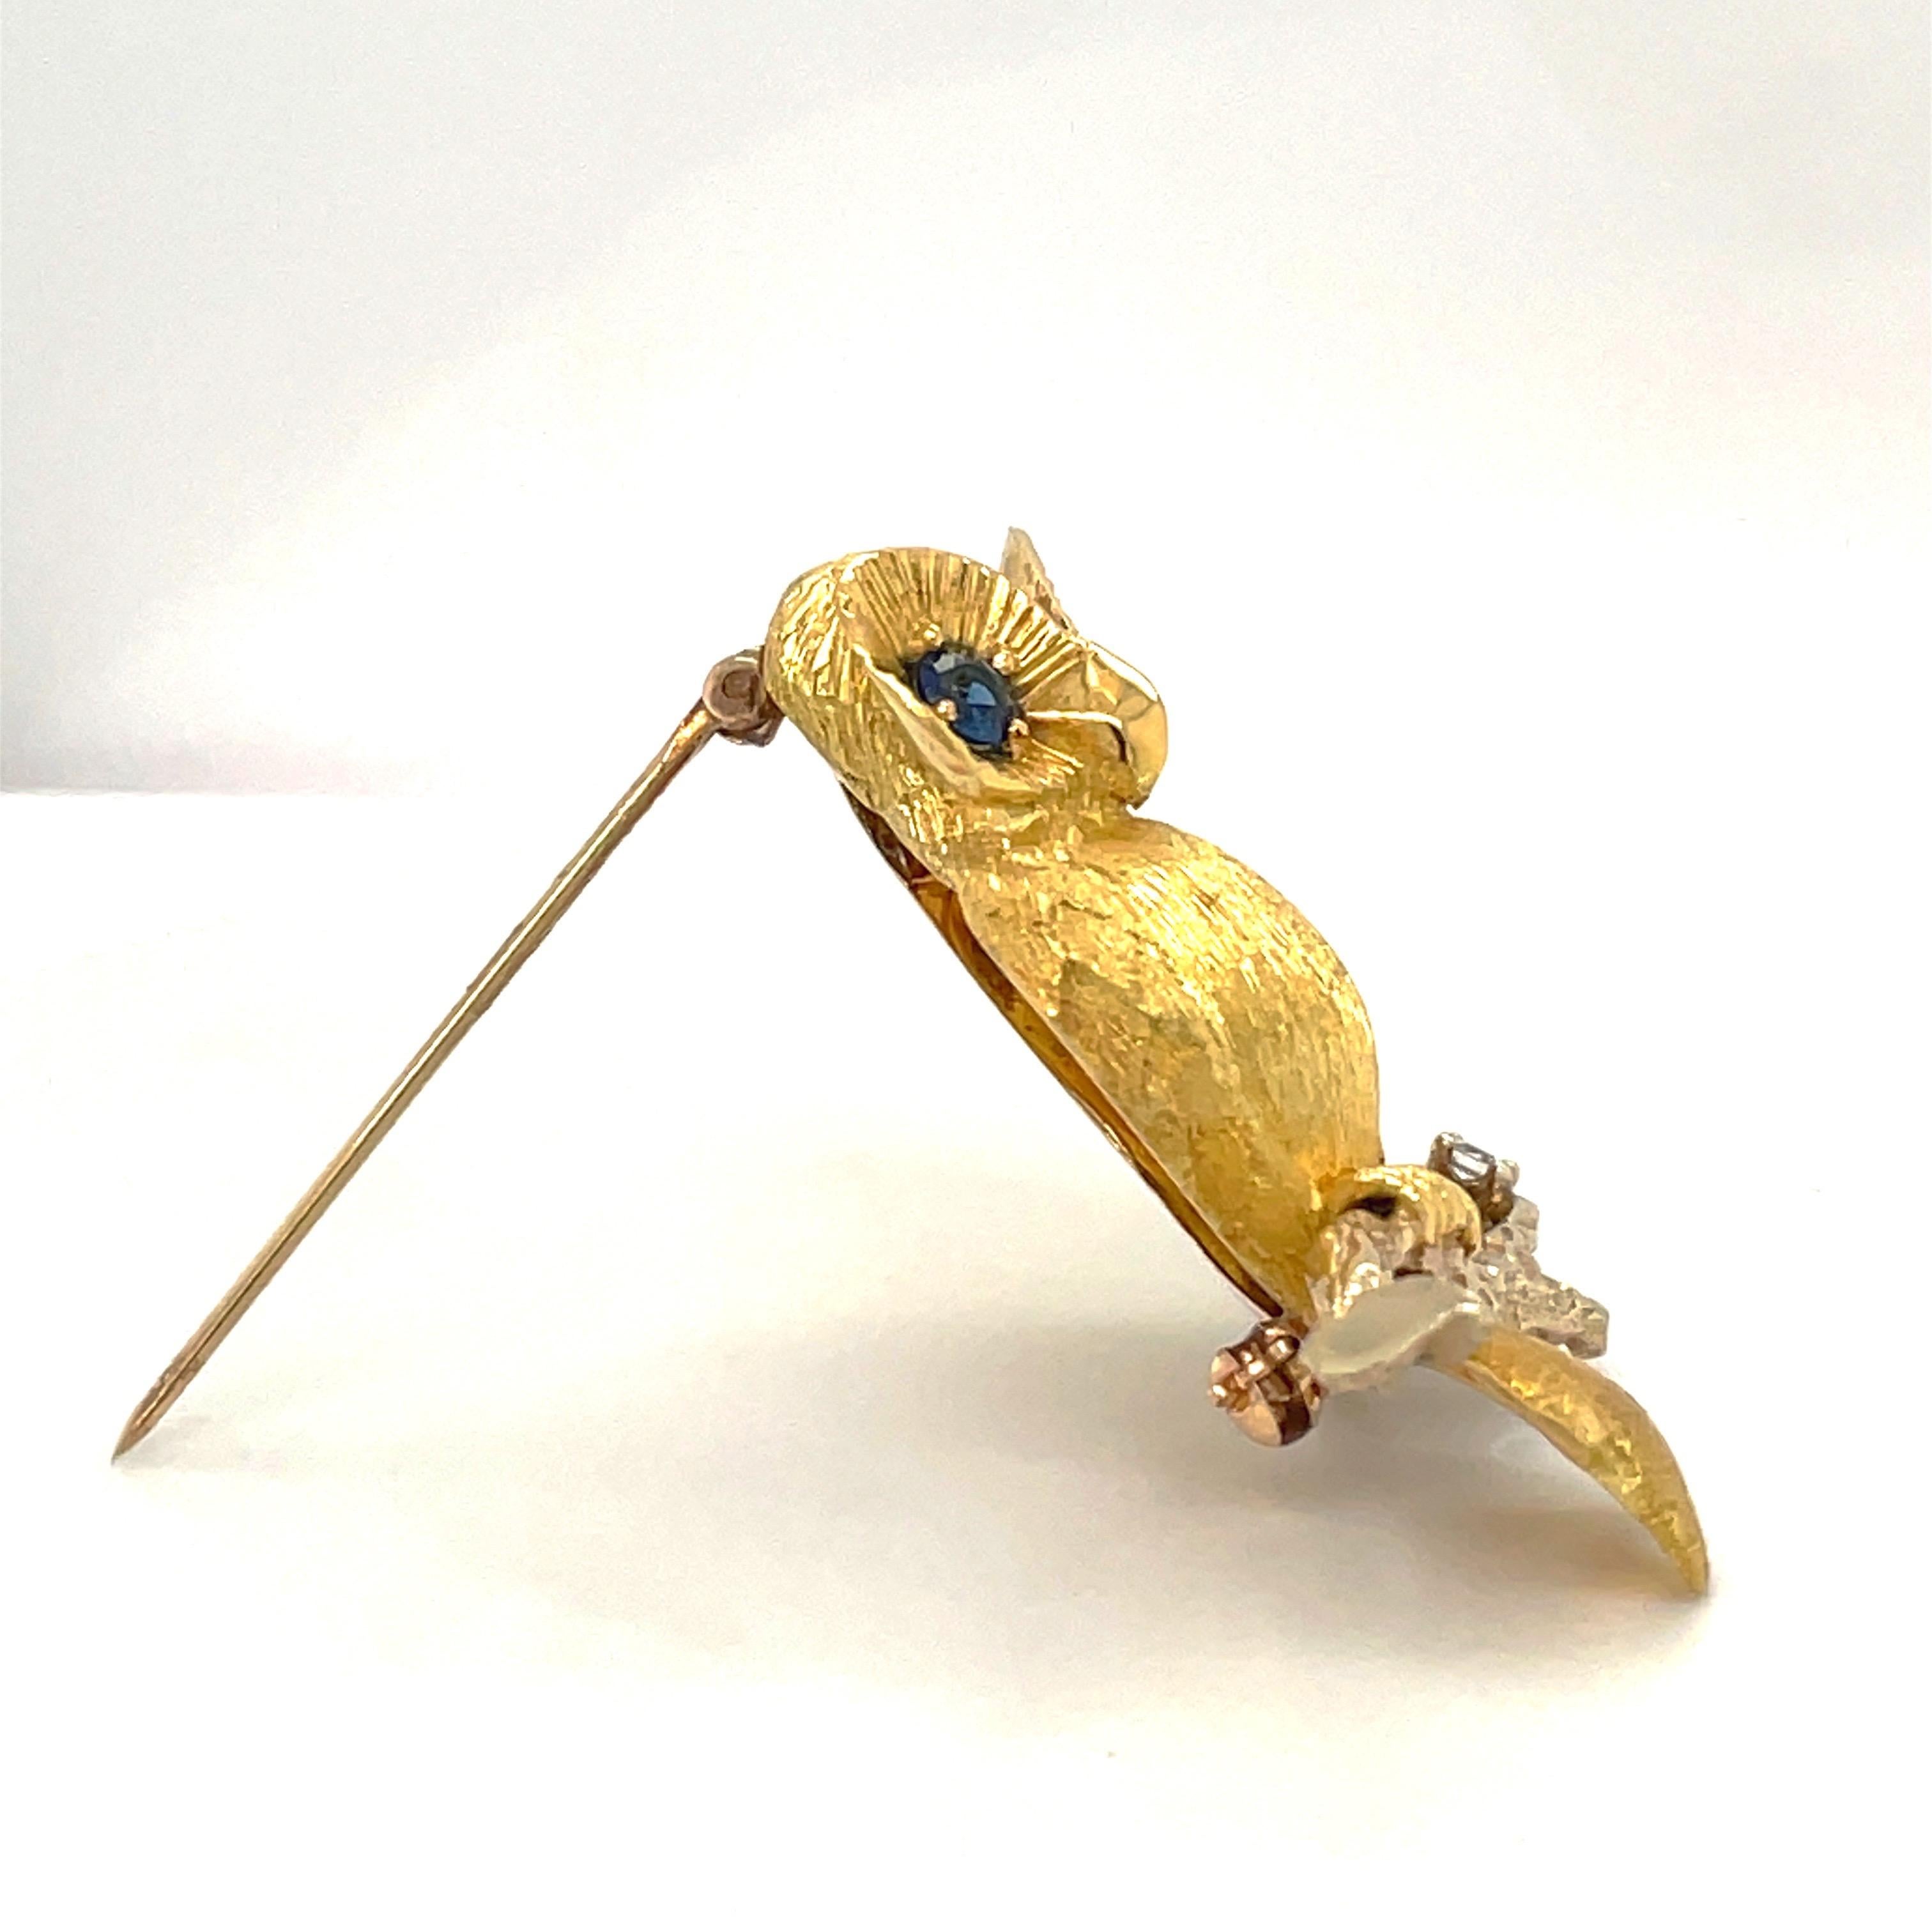 A beautifully sculpted 18 karat yellow gold owl brooch. The sandblasted gold owl sits on a high polished branch tipped with a round diamond. His large eyes are set with round blue sapphires. Stamped 18K.
Made by George Lederman